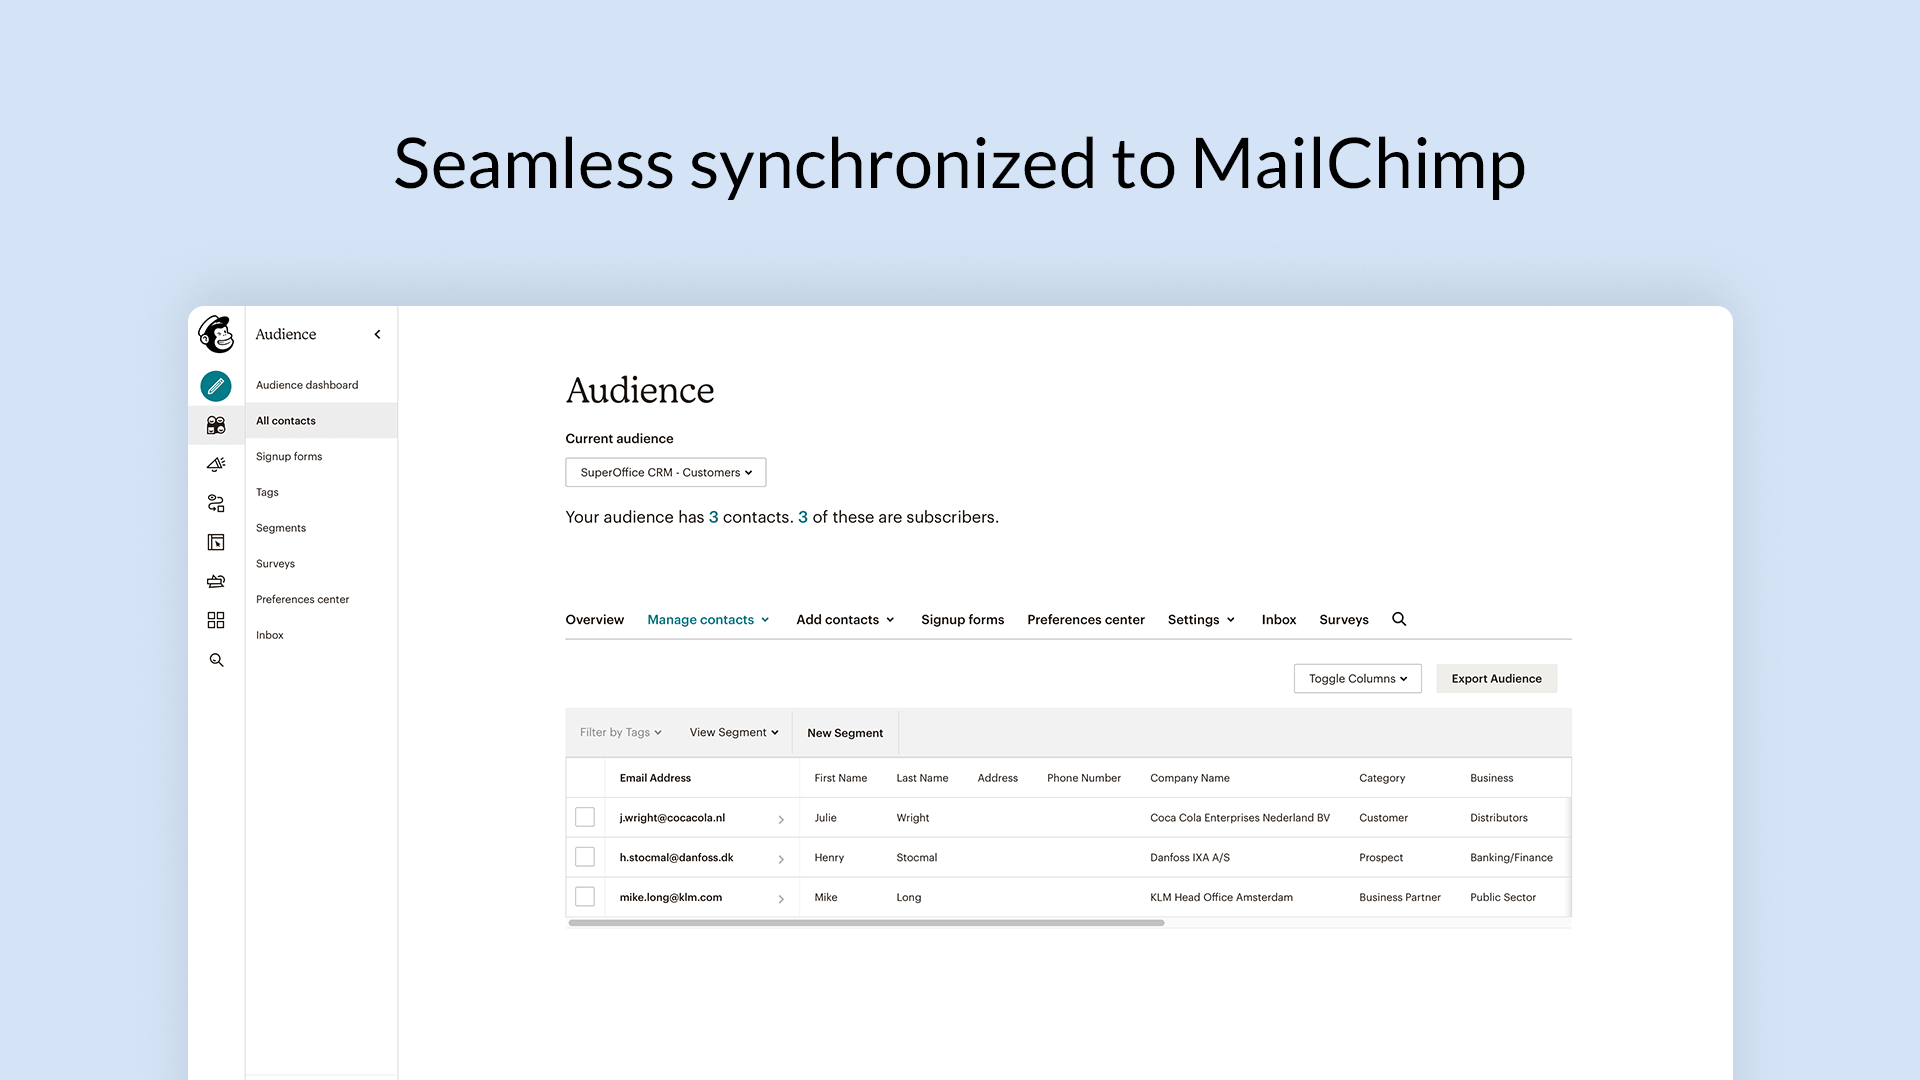 3. Seamless synchronized to Mailchimp.png